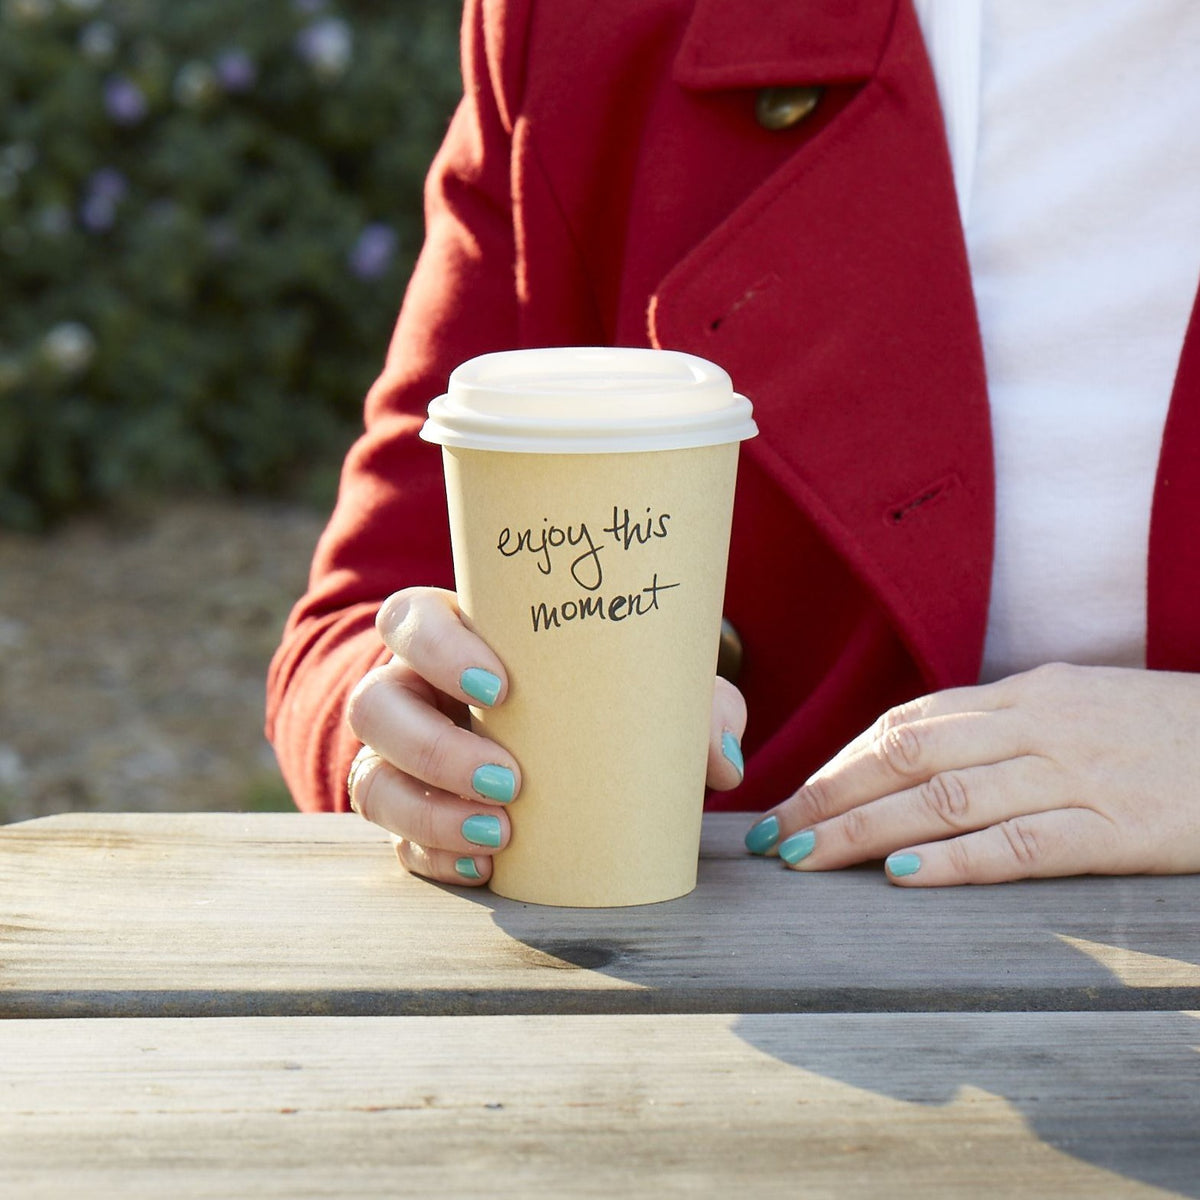 Lifestyle photo of a woman holding a cup of coffee while seated in a park with the inspirational message of &#39;enjoy this moment&#39; written ono the side of the cup.